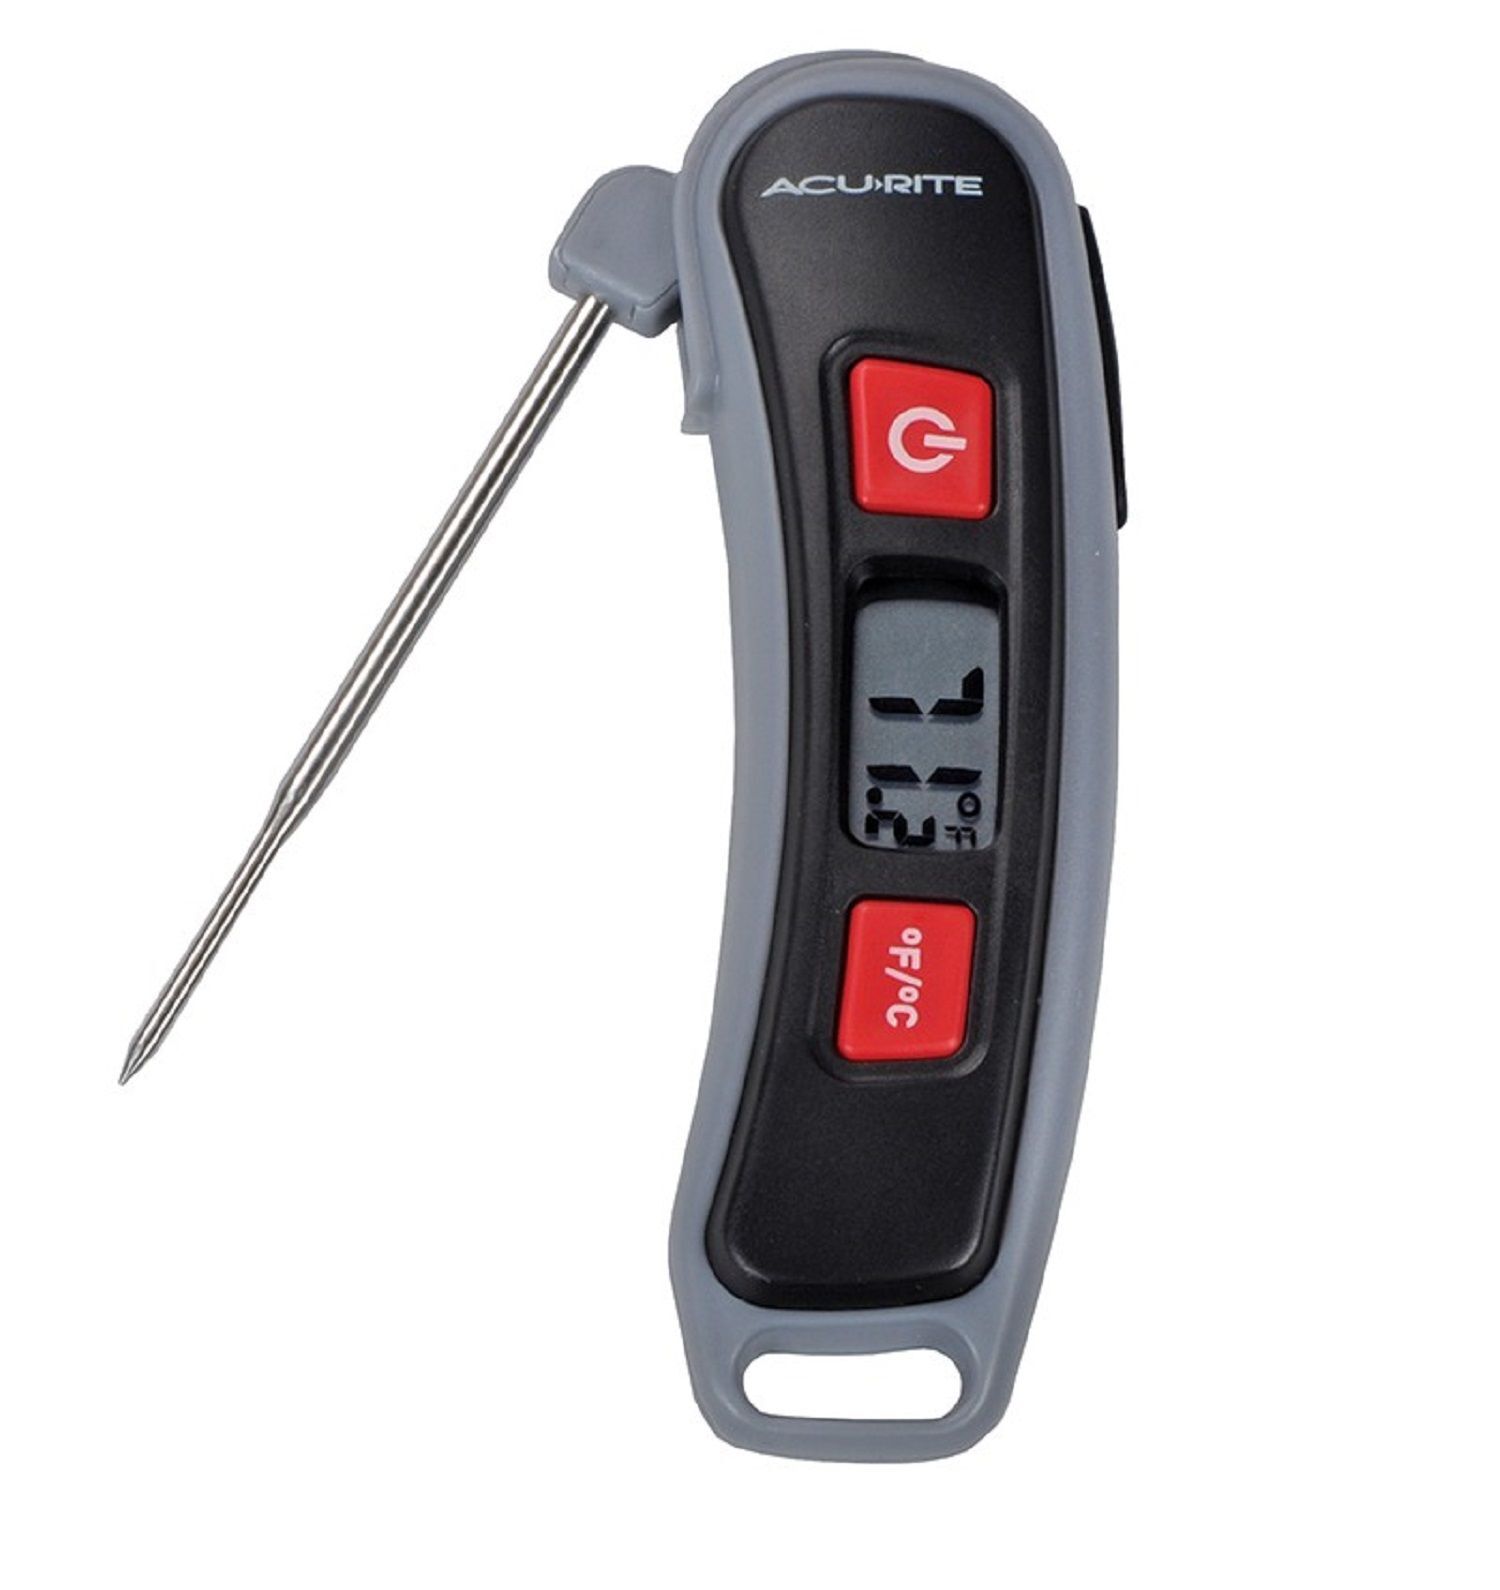 Digital Instant Read Thermometer.